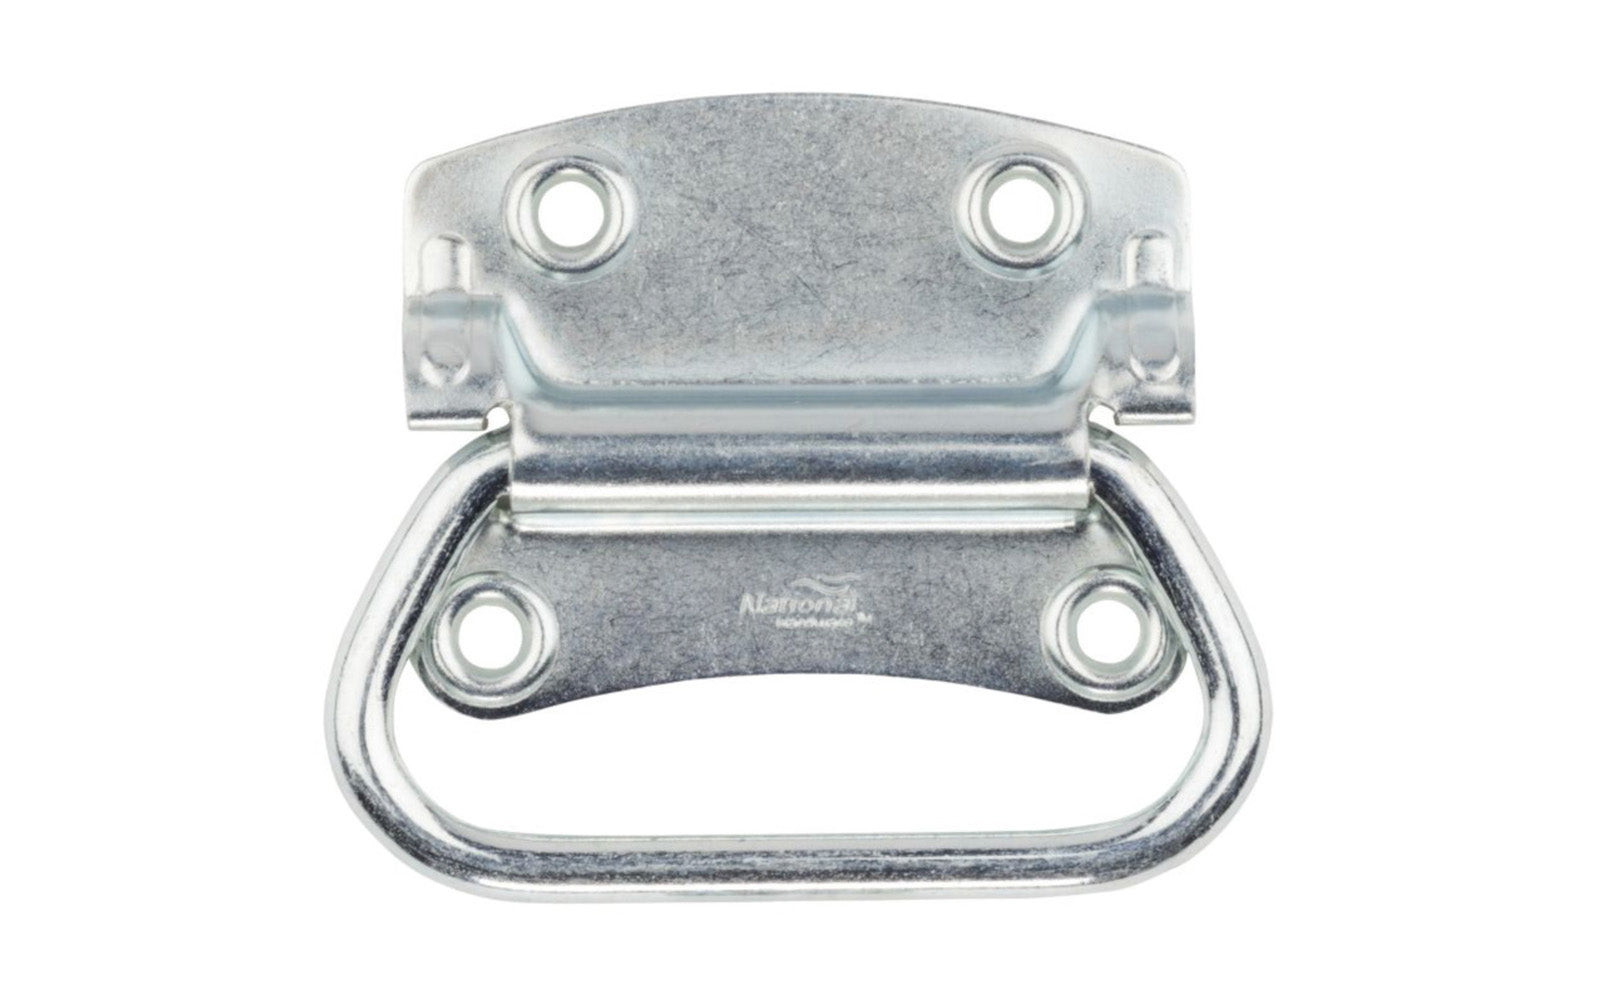 This 3-1/2" chest handle is made of cold rolled steel. Designed for smaller chests & boxes. Zinc-plated steel. Sold as one handle in pack. National Hardware Model No. N117-002. 038613117006. 3-1/2" Zinc Plated Steel Chest Handle